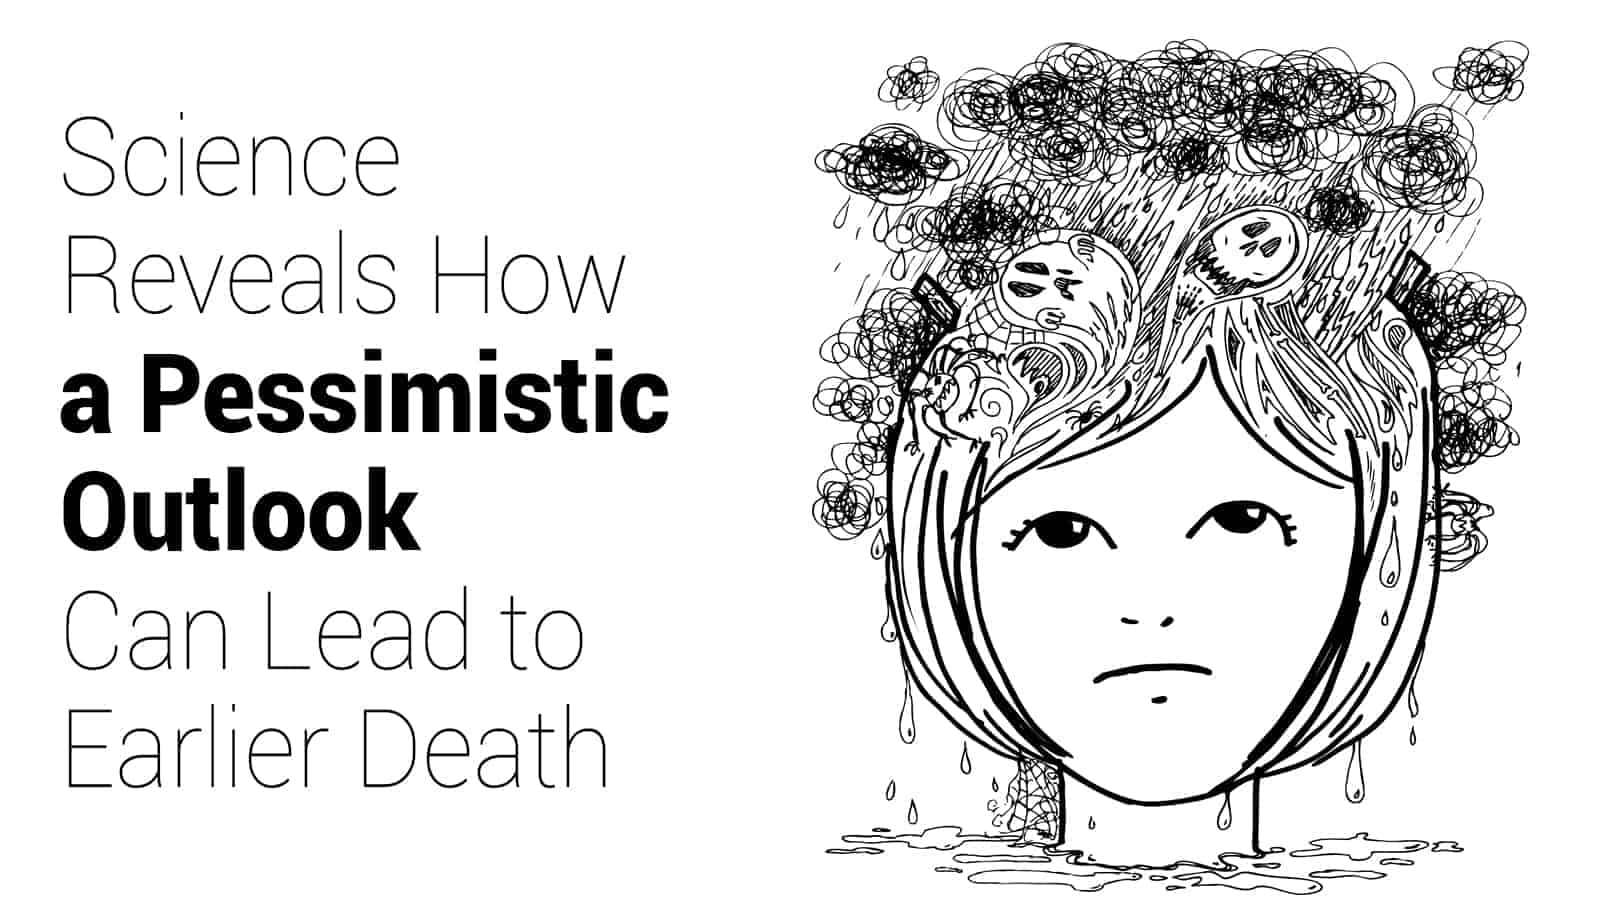 Science Reveals How a Pessimistic Outlook Can Lead to Earlier Death